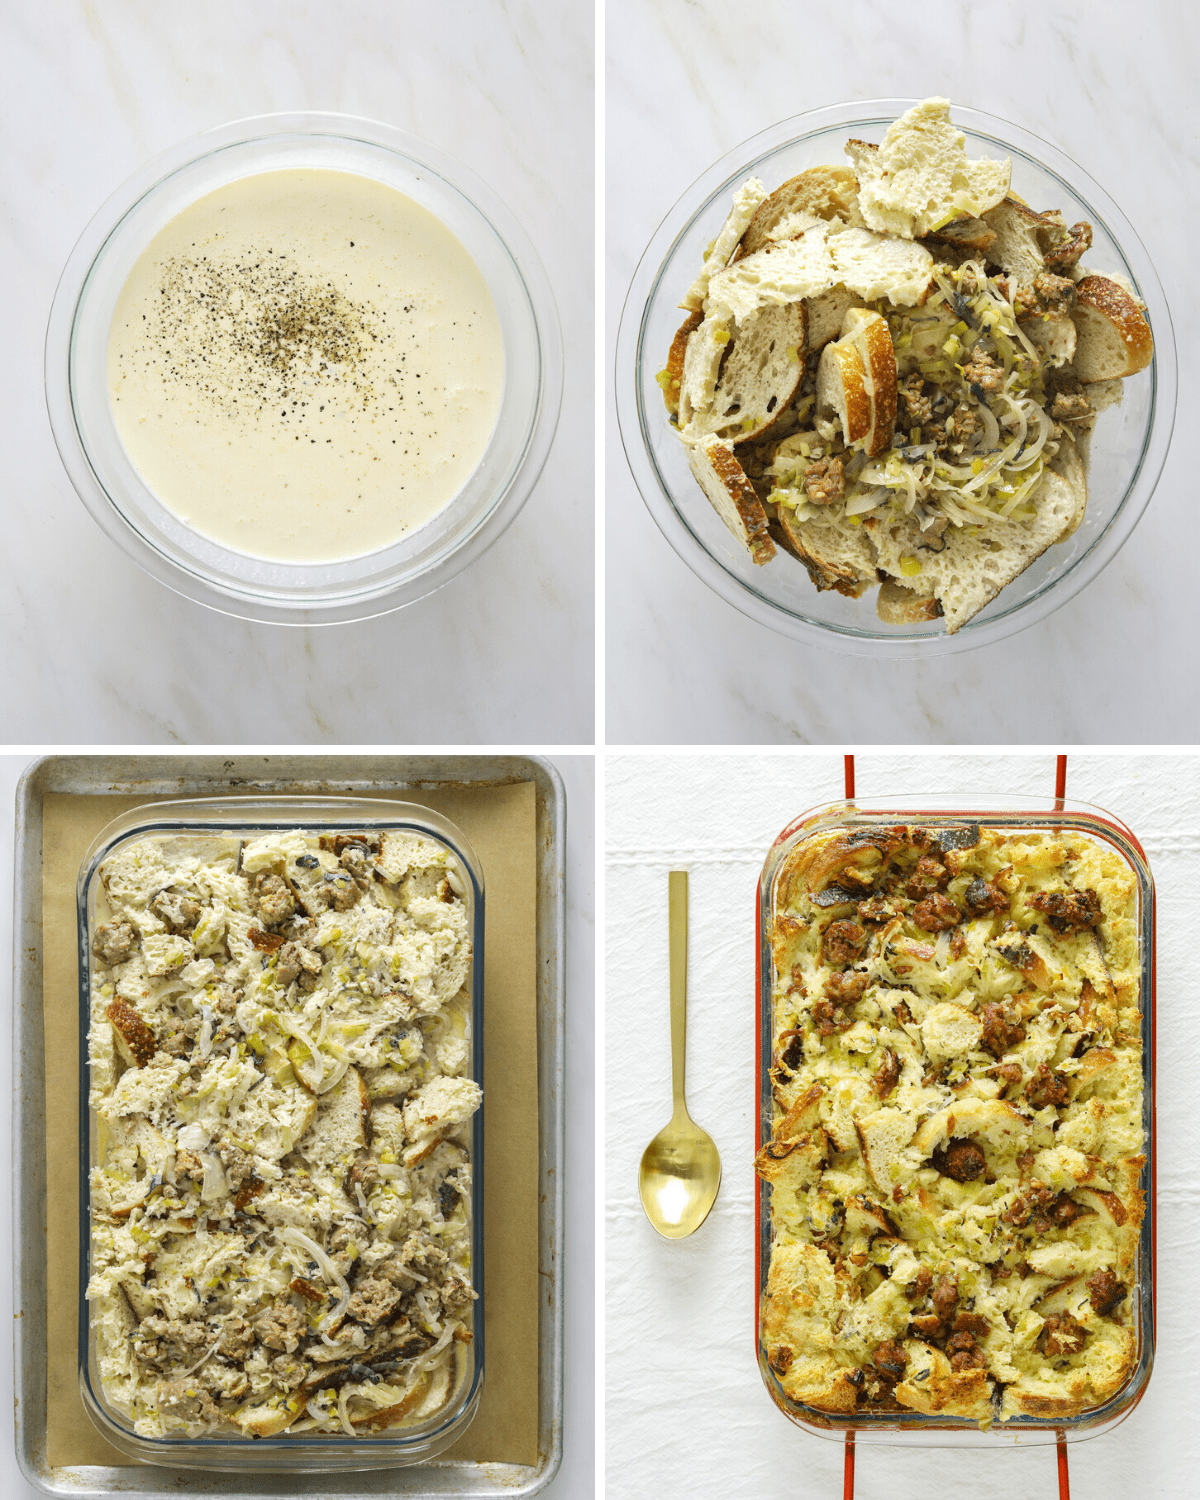 a collage of recipe steps: a bowl of seasoned cream, a bowl of ingredients tossed together, two baking dishes with bread pudding.